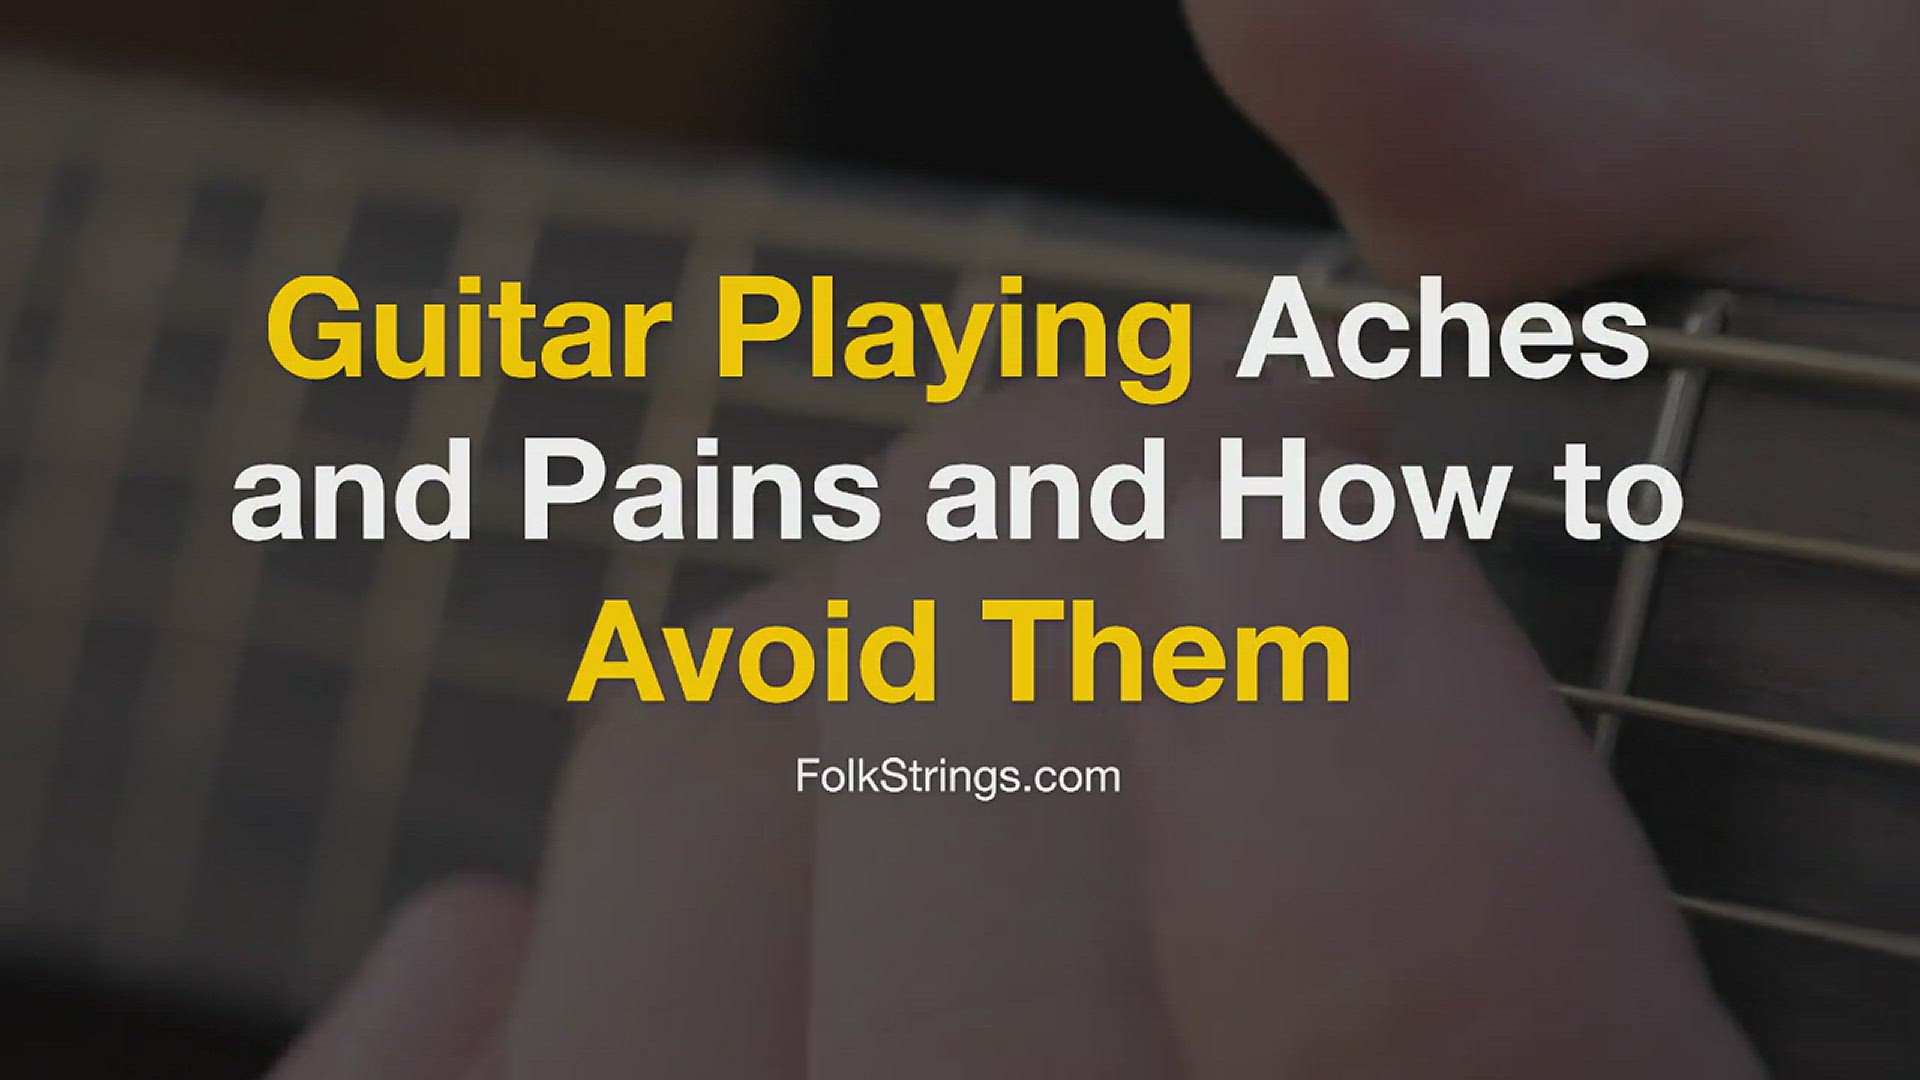 'Video thumbnail for 6 Annoying Aches and Pains From Playing Guitar and How to Avoid Them'